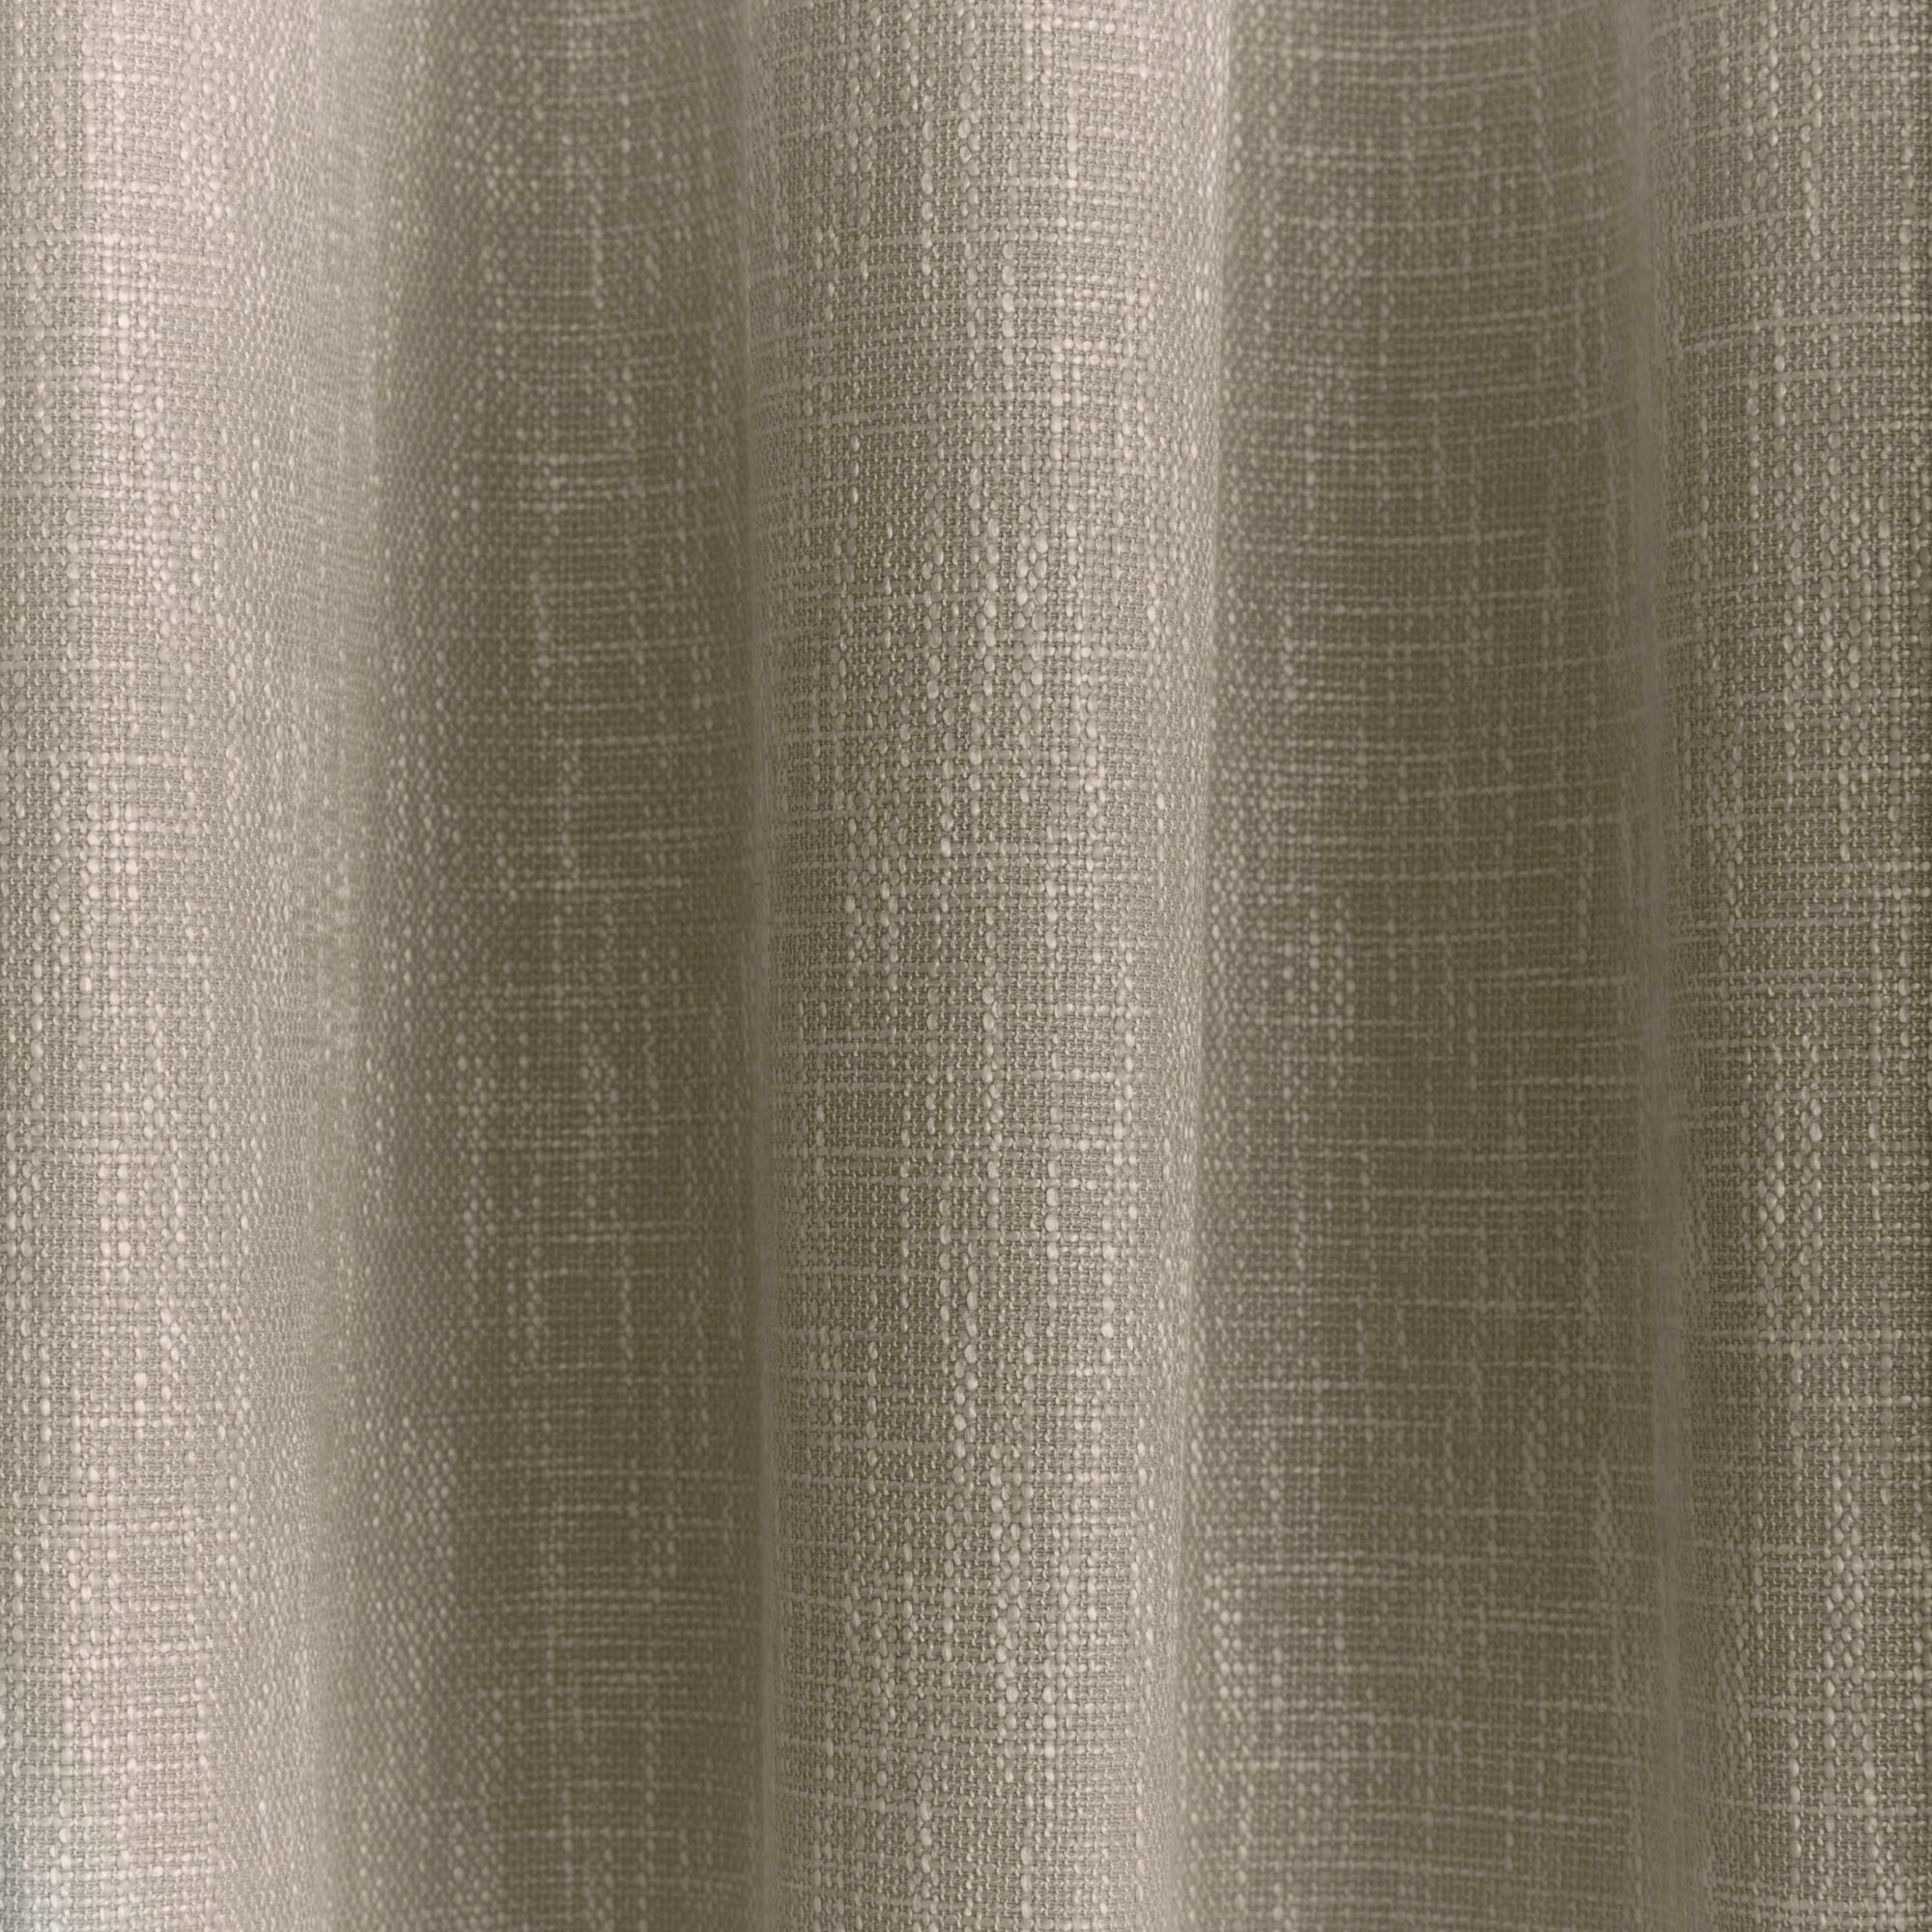 Pair of Eyelet Curtains Boucle by Appletree Loft in Linen